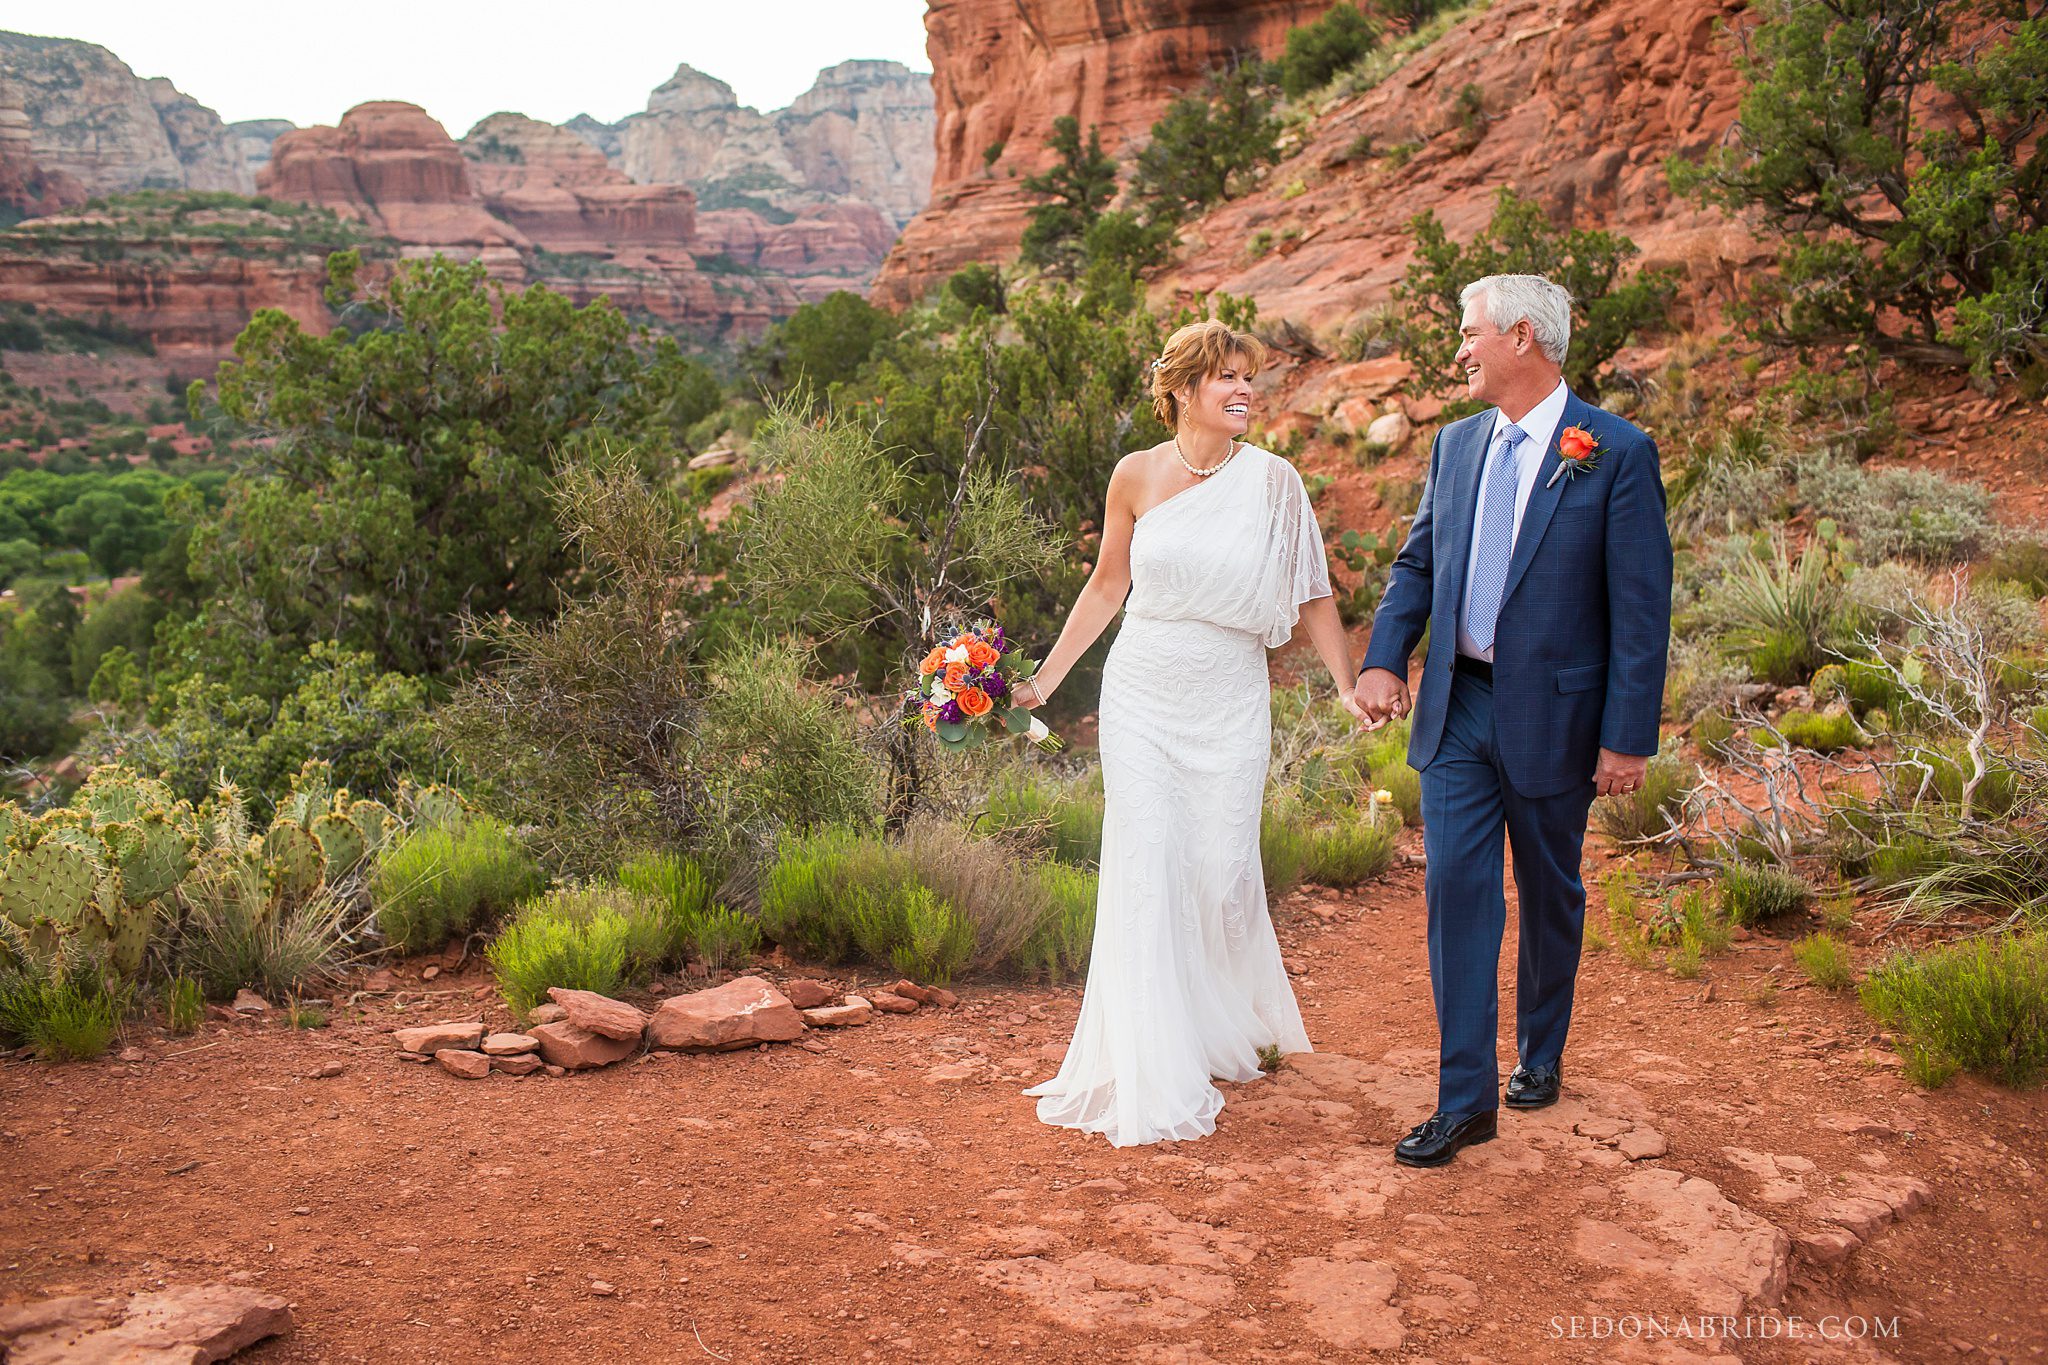 Bride and groom walking with the red rock backdrop behind them